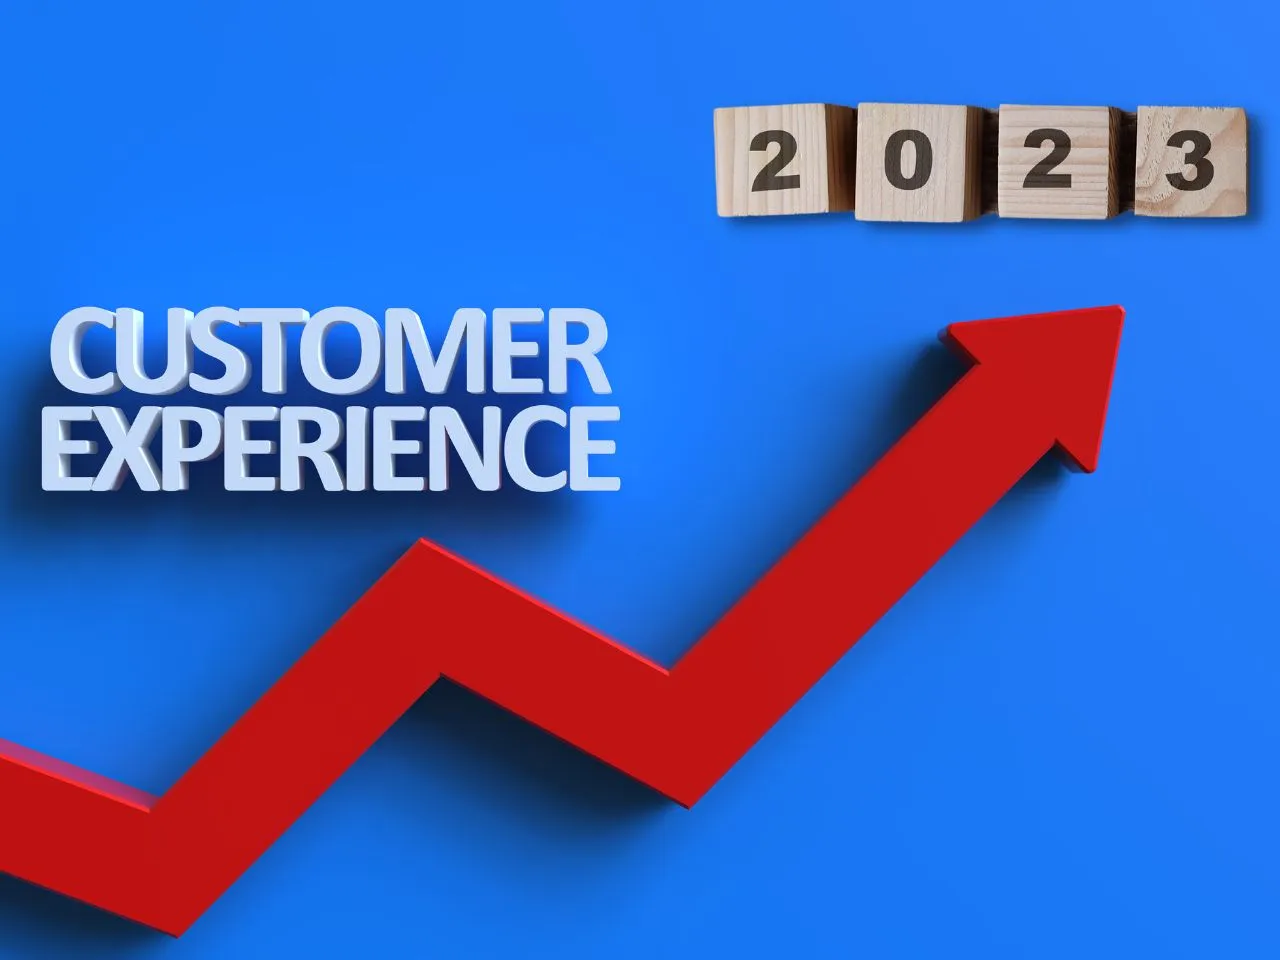 Customer Experience: A Differentiator for Marketers in 2023